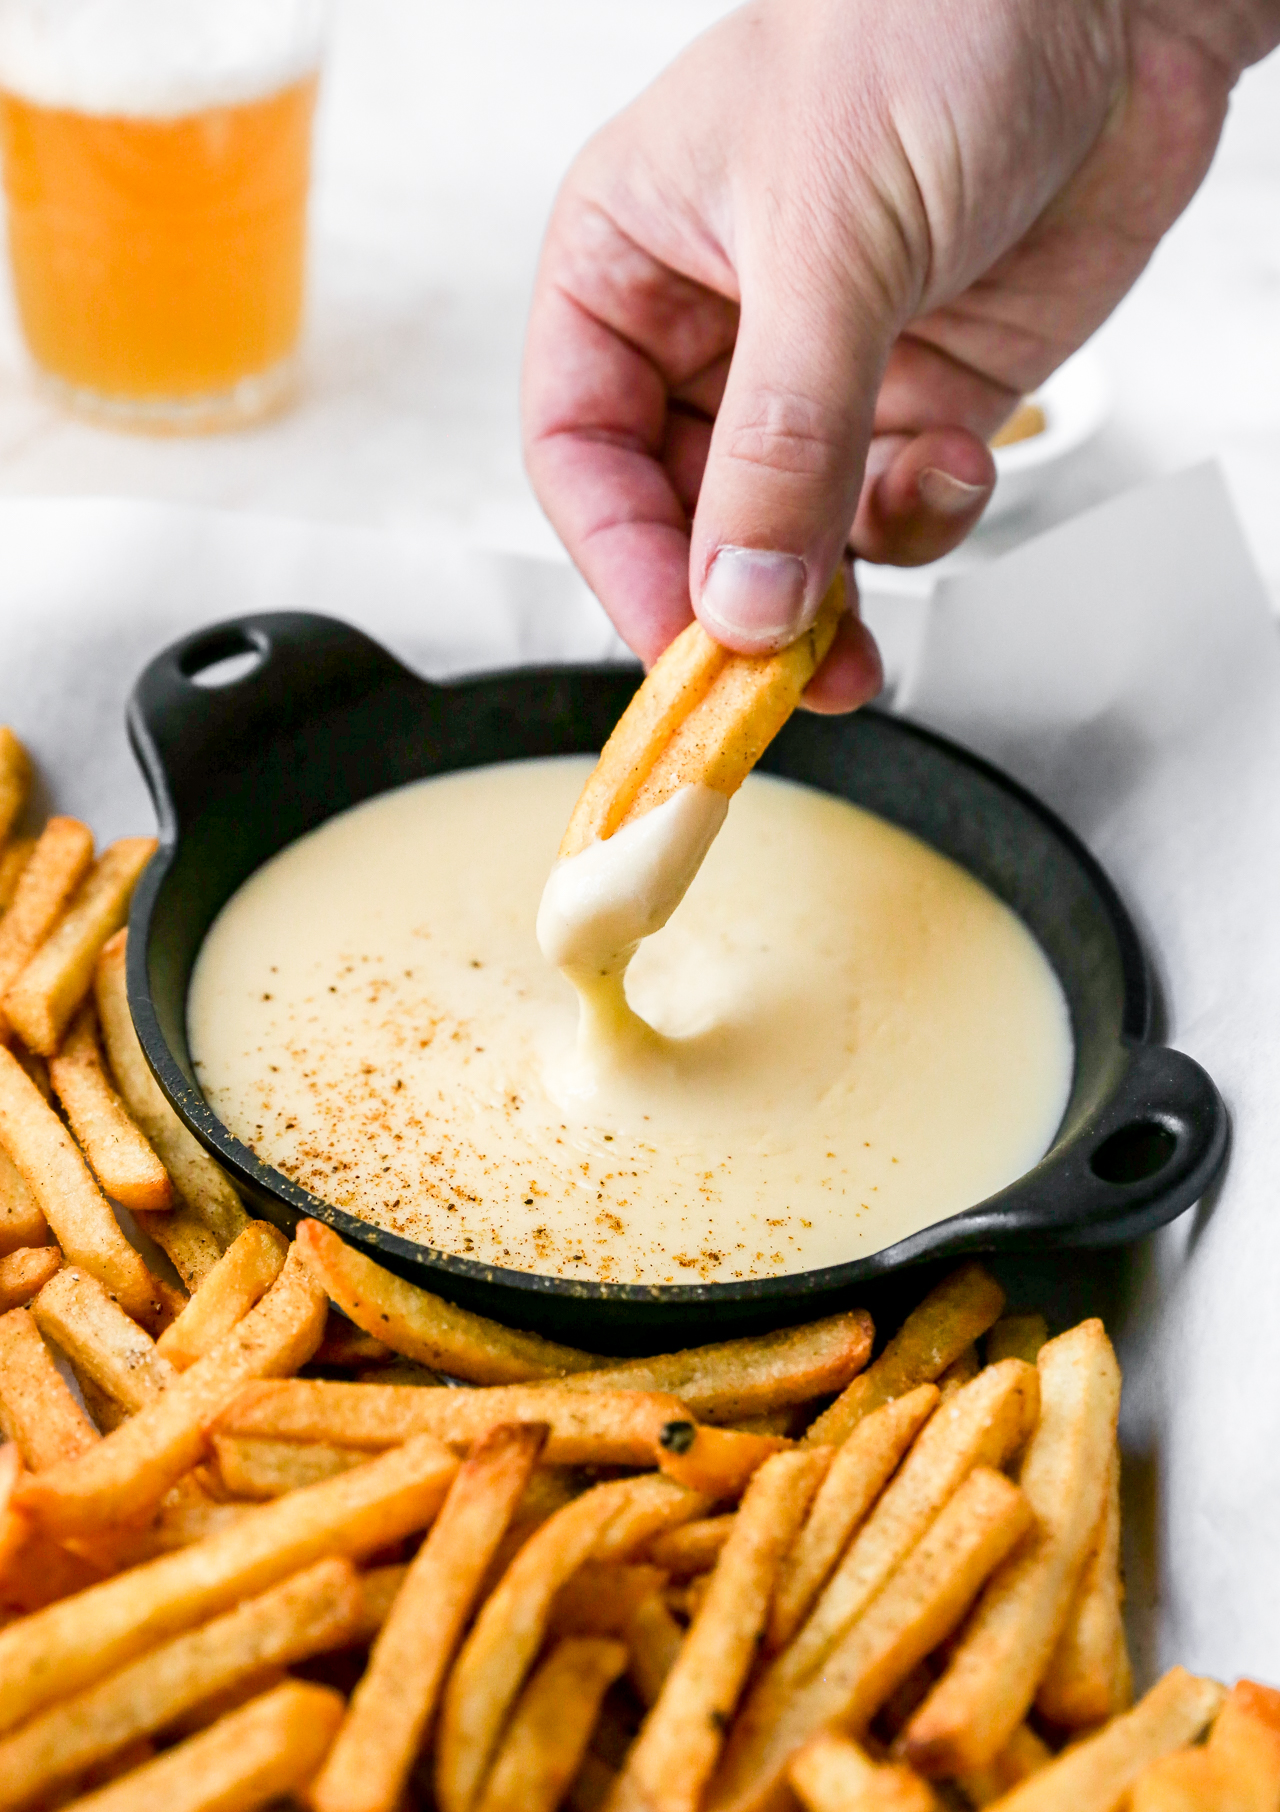 Fries with Sauce - Yes to Yolks